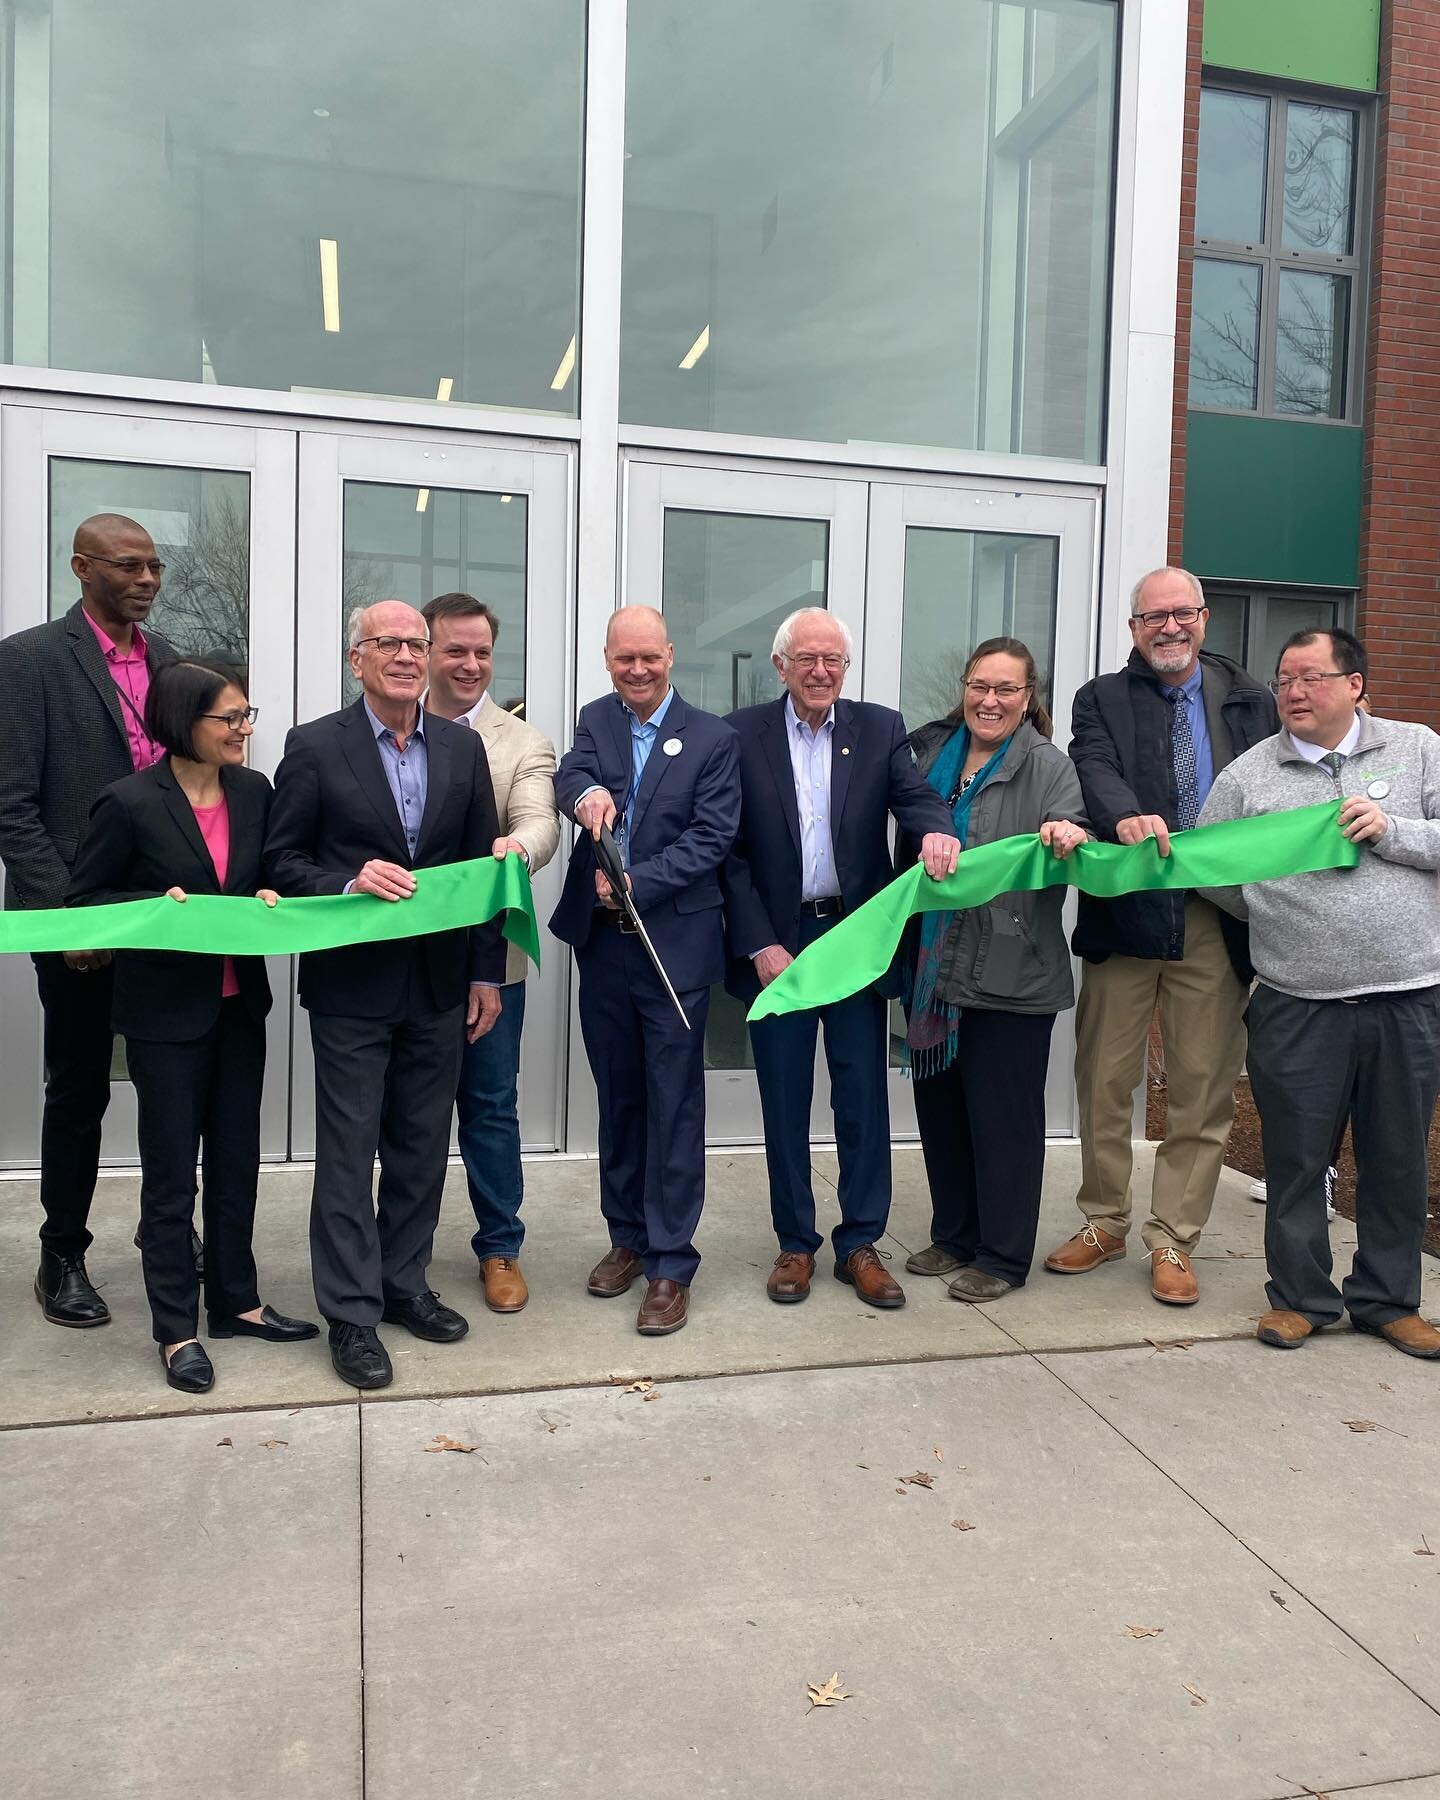 Winooski is where it&rsquo;s at! Today we celebrate the official completion of our incredible school. Joined by our entire federal delegation, city councilors, mayor and deputy mayor,  I hope students know that their leadership is behind them all the